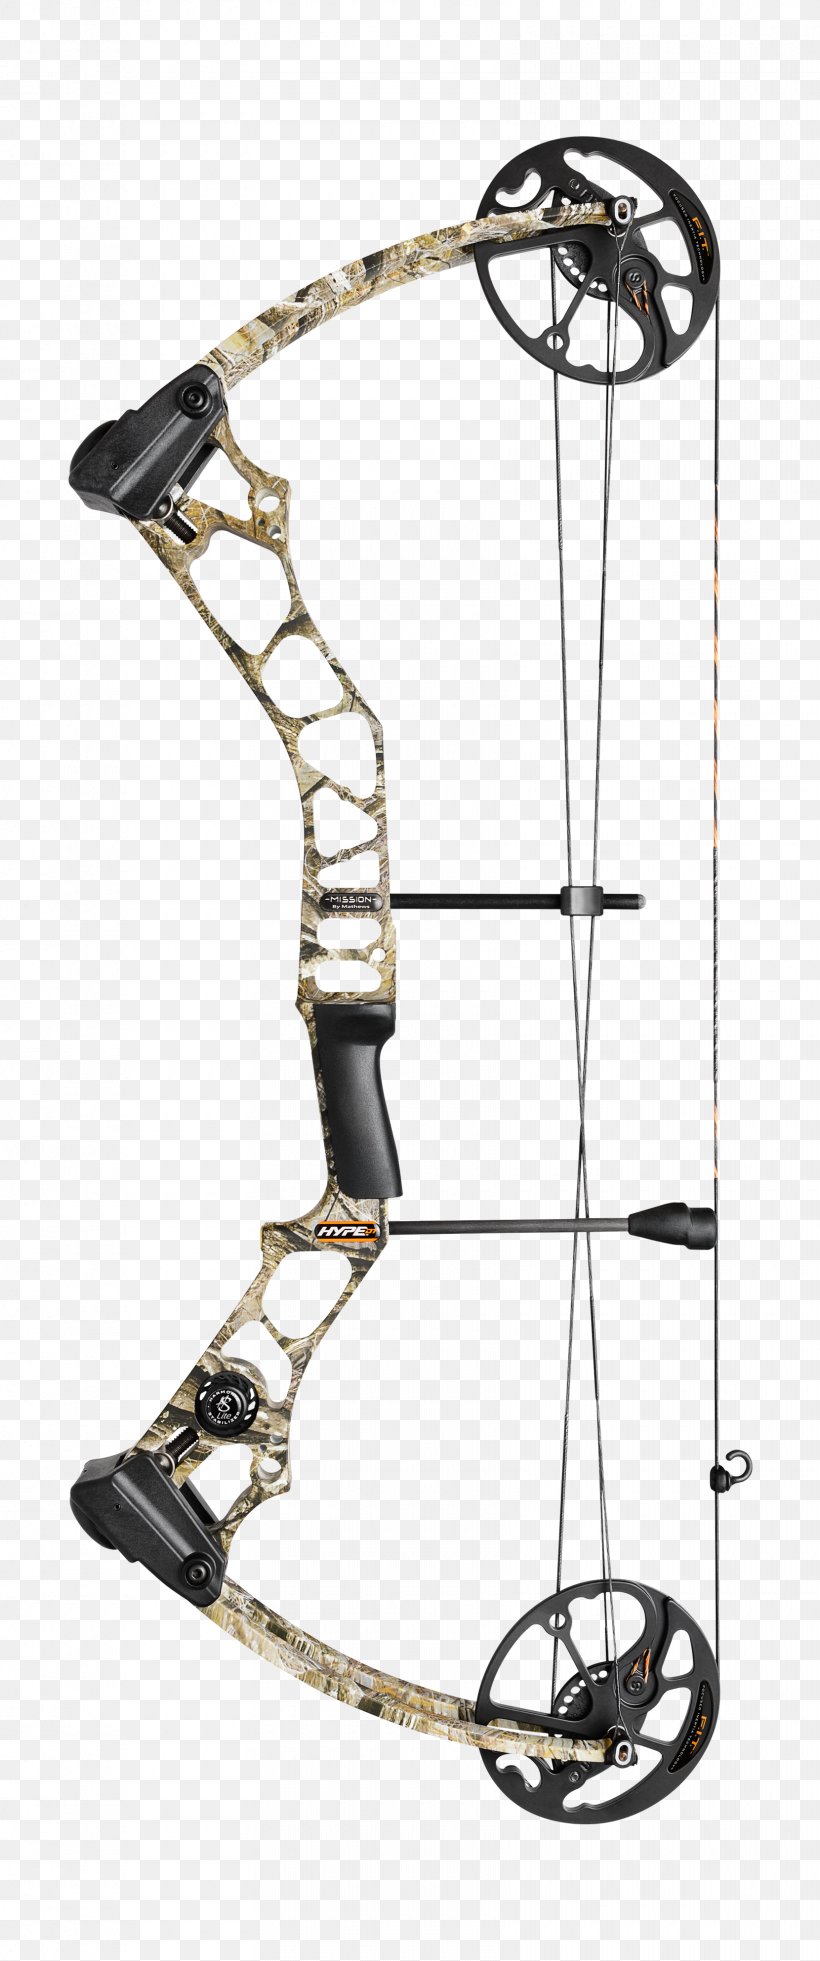 Archery Bow And Arrow Compound Bows Bowhunting, PNG, 1660x3970px, Archery, Archery Country, Biggame Hunting, Bit, Bow And Arrow Download Free